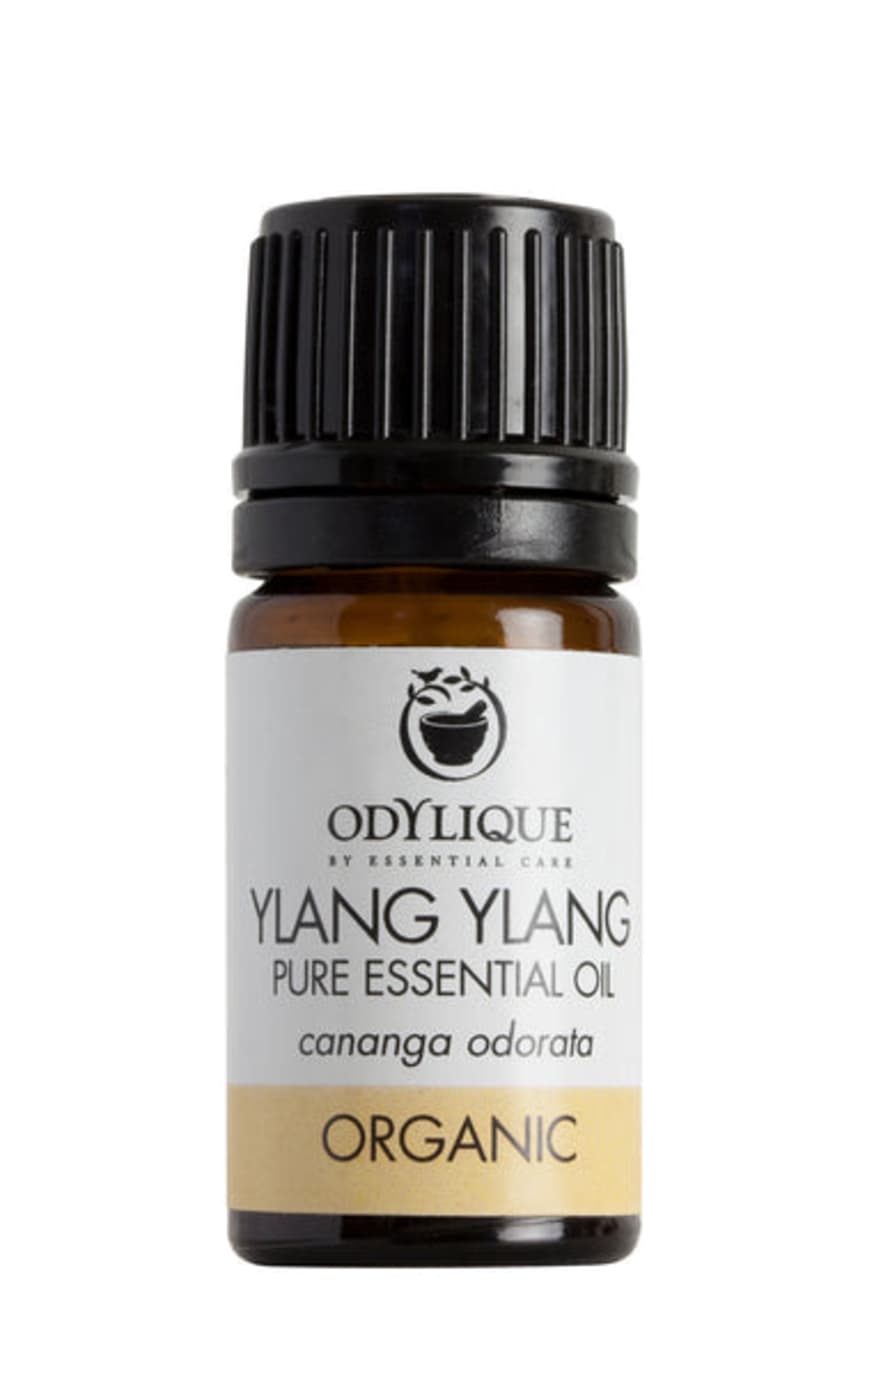 Odylique Organic Ylang Ylang Essential Oil